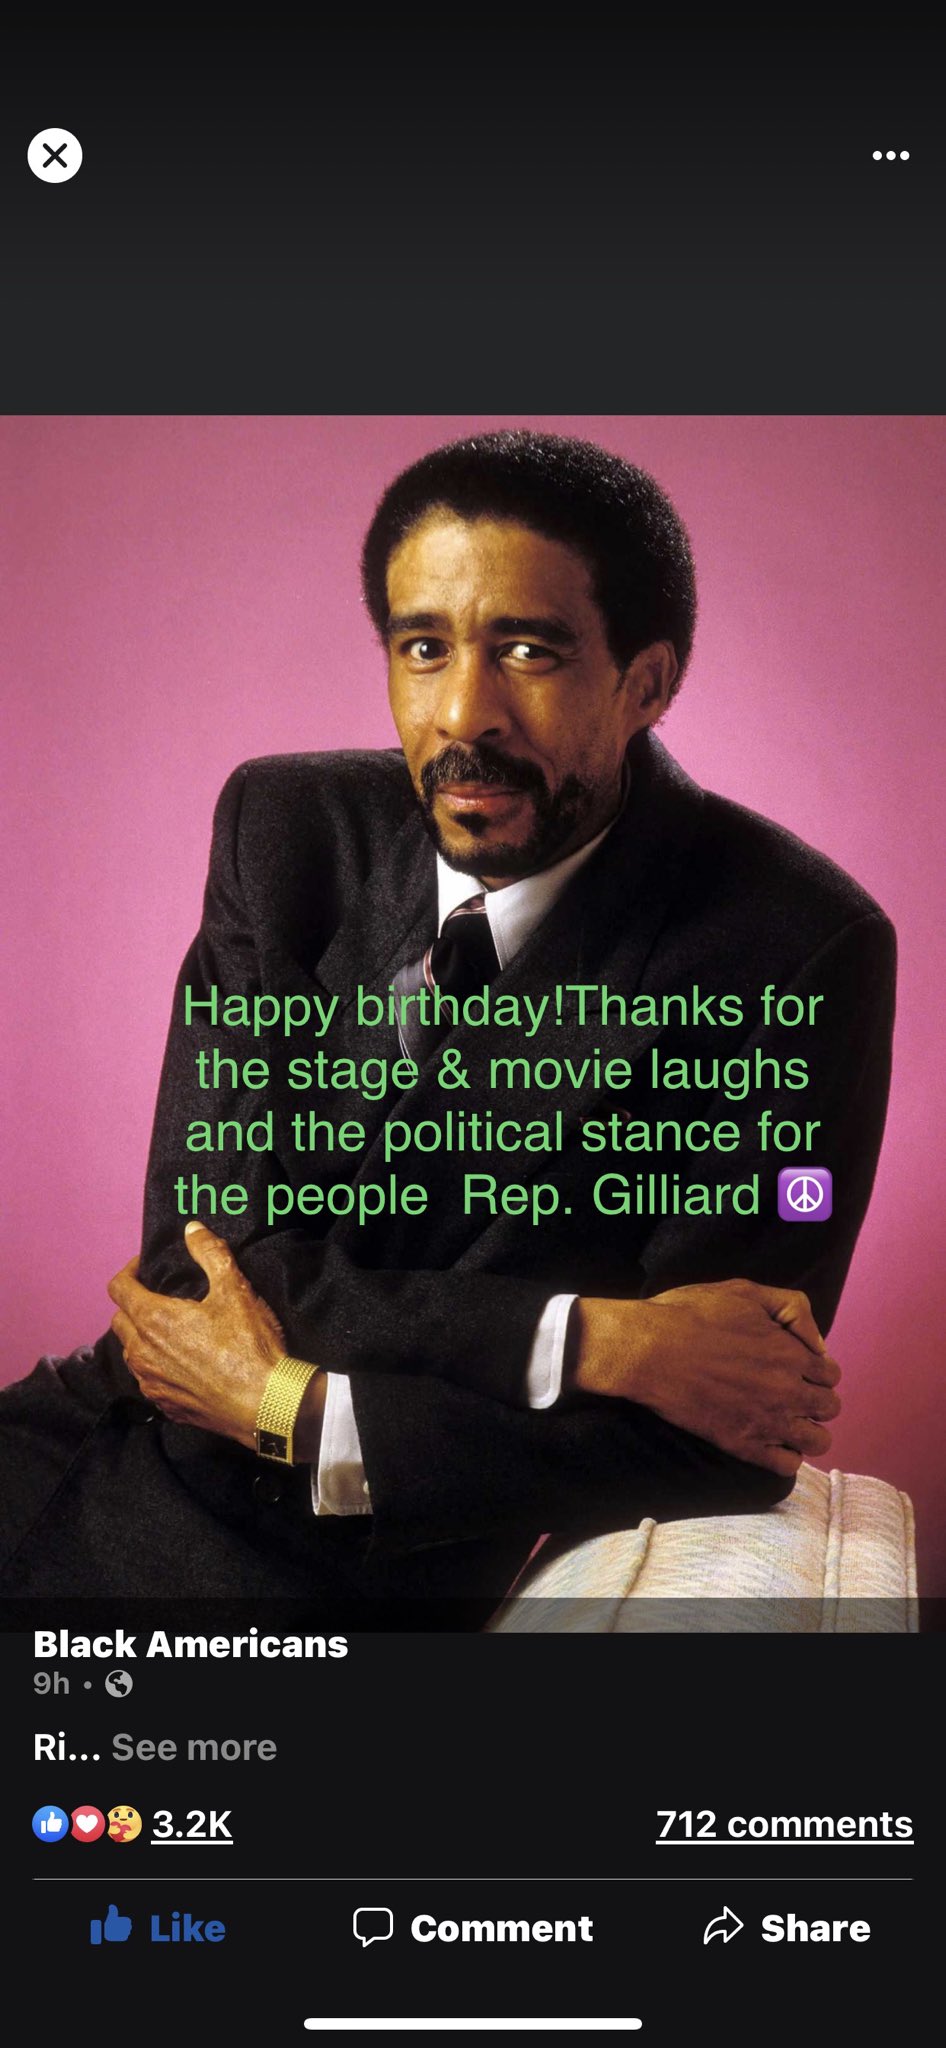 Richard Pryor 
December 1, 1940 December 10, 2005
HAPPY BIRTHDAY - R.I.P.
Stand-up Comedian and Actor. 